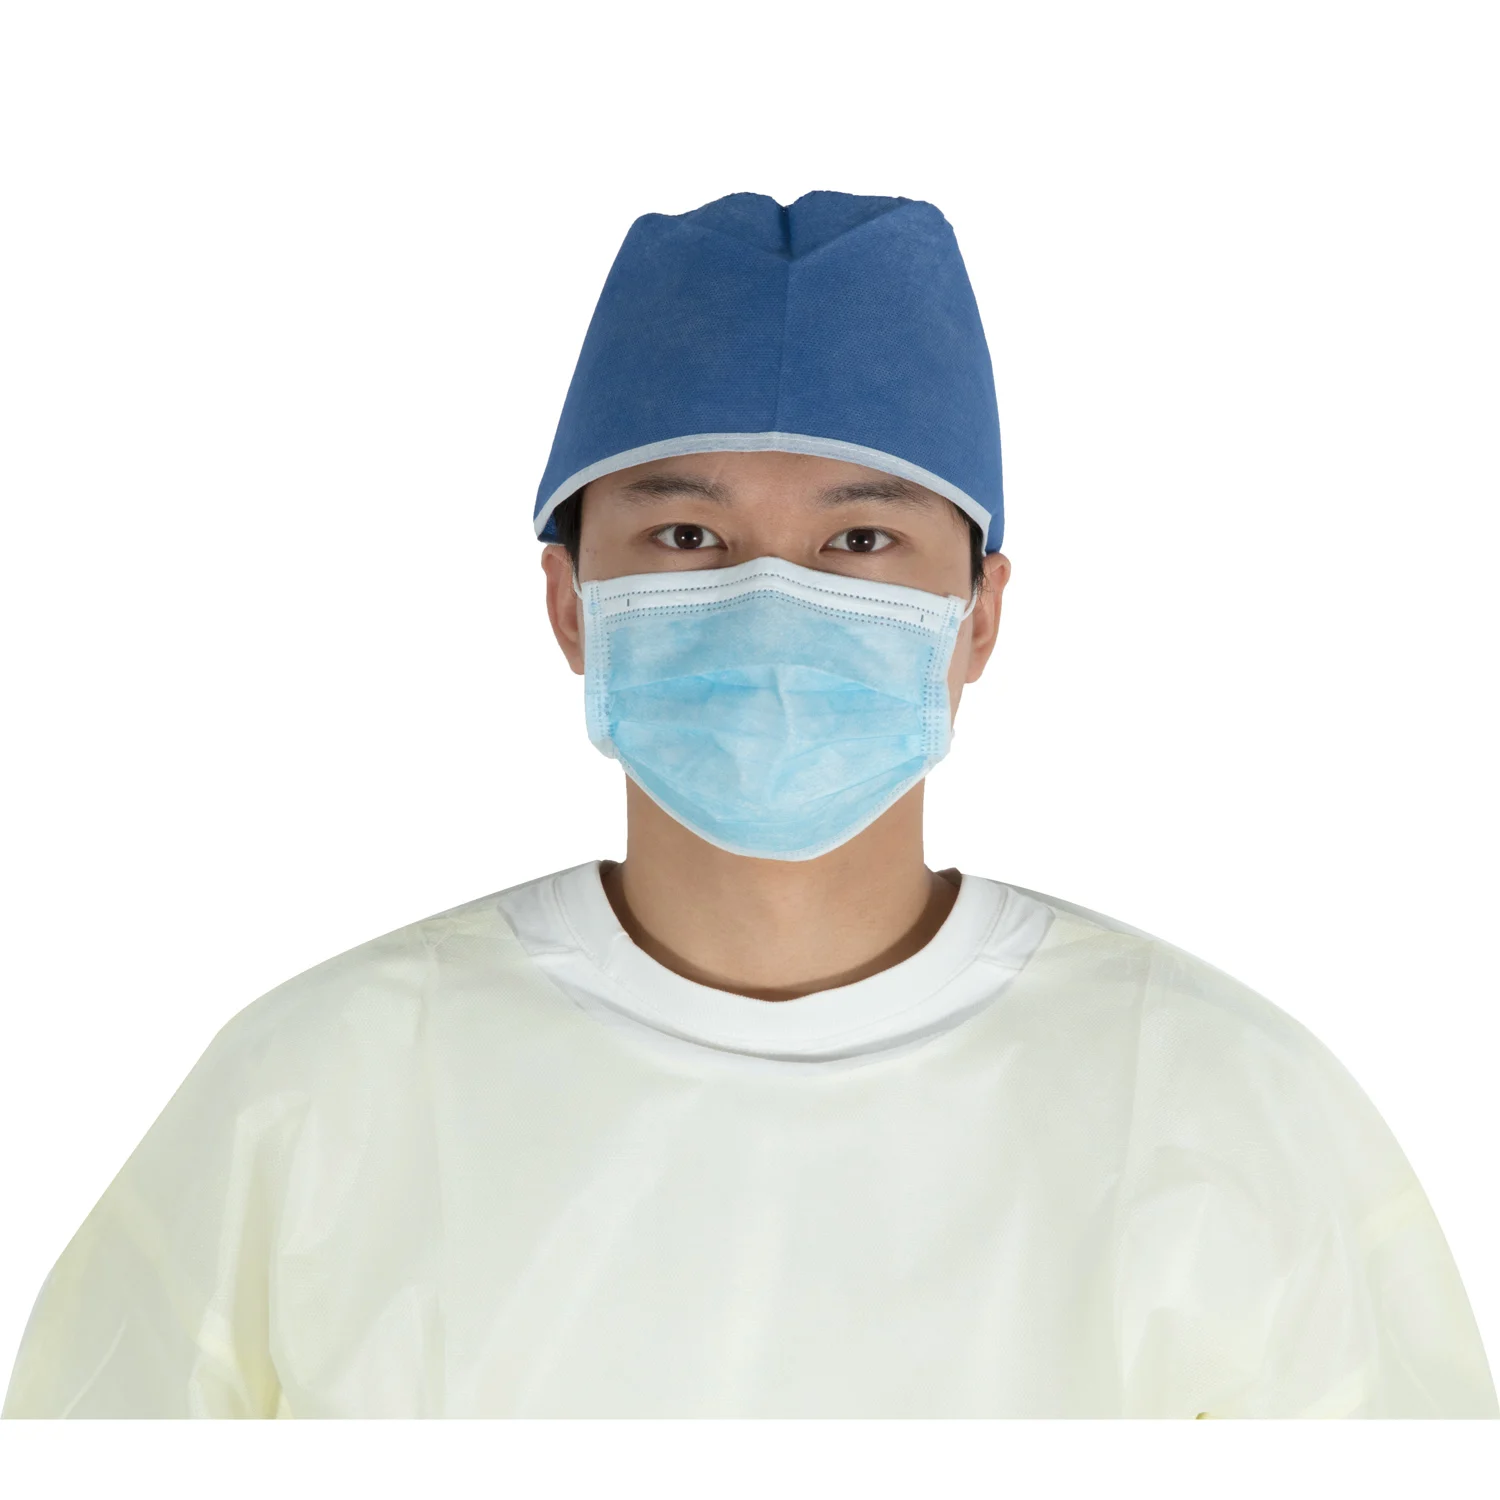 Disposable Surgeon Surgical Doctor Nurse Bouffant Cap with Ties